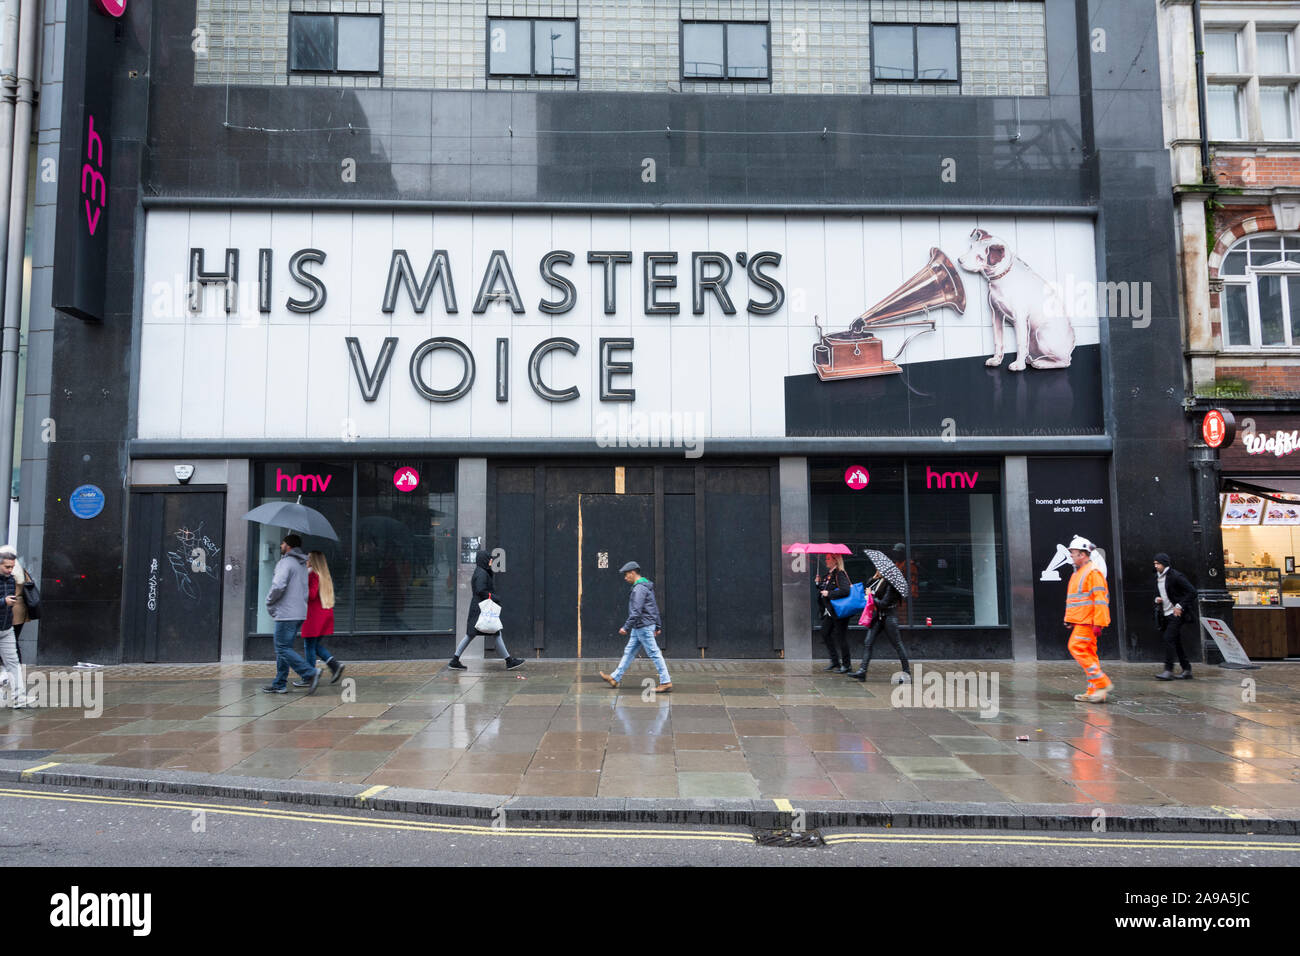 The now-closed His Masters Voice (HMV) flagship record store, 363 Oxford Street, London, UK Stock Photo